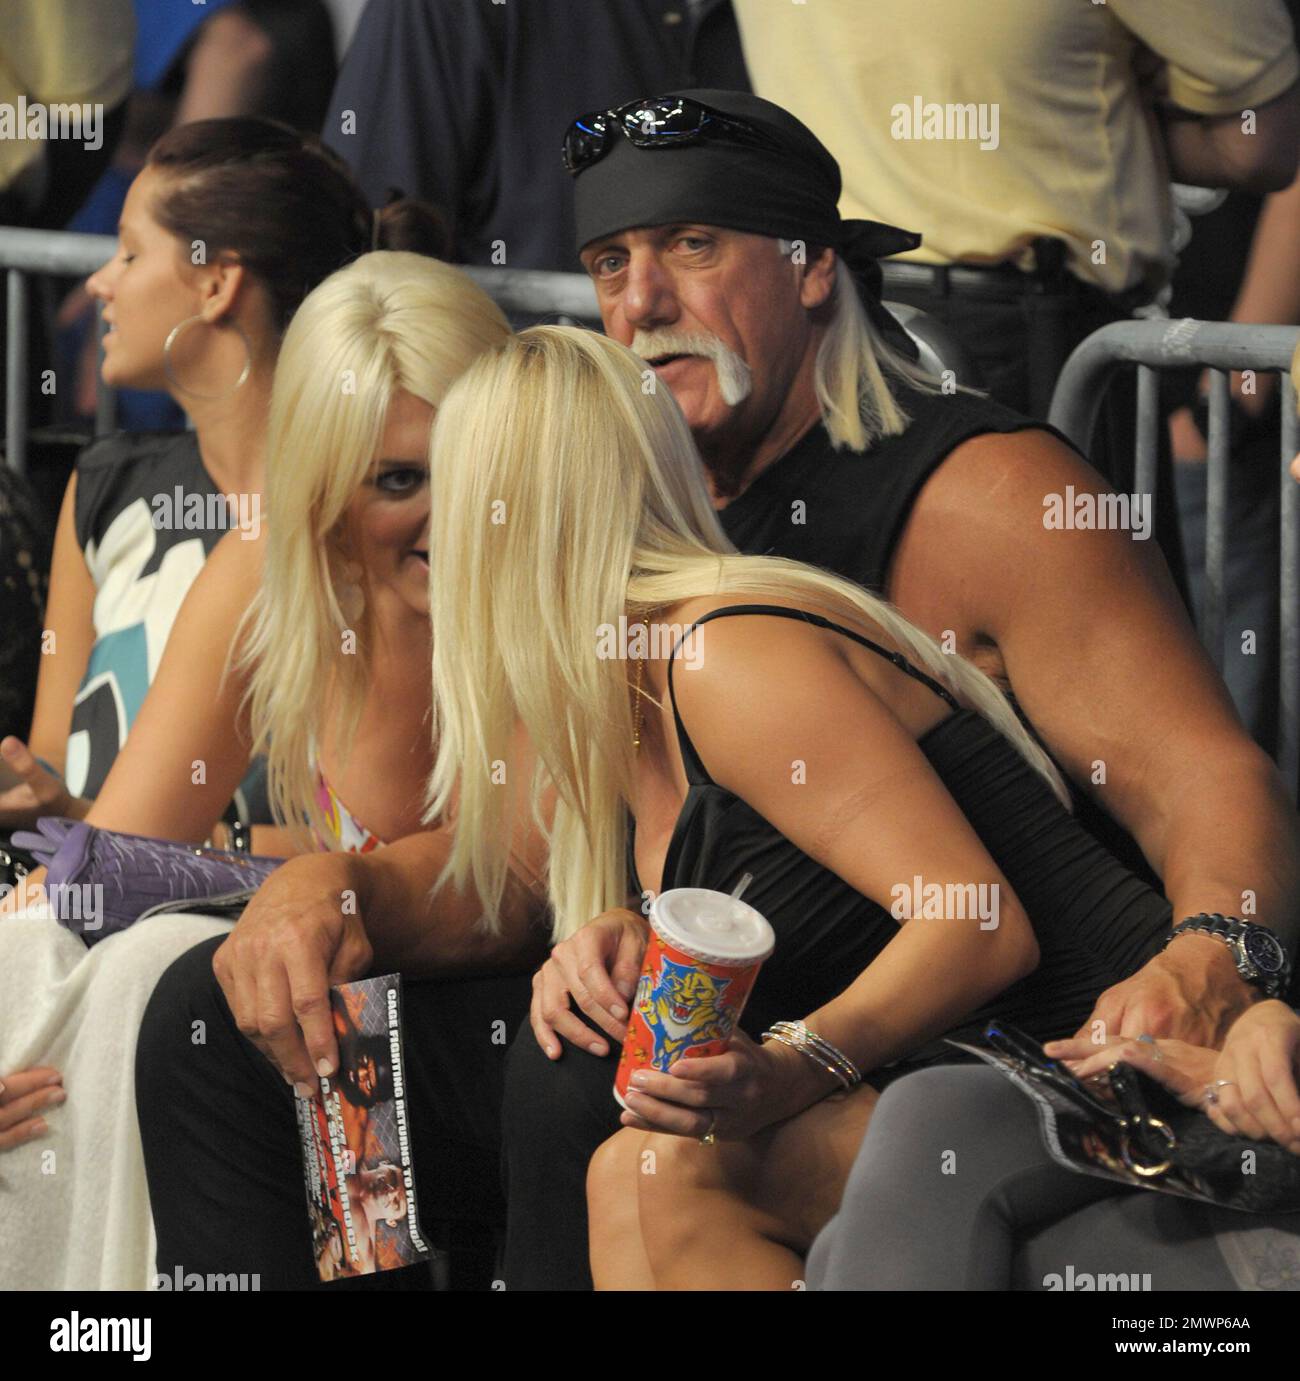 SUNRISE - FL - OCTOBER 04: (EXCLUSIVE COVERAGE) is the Hulk AKA Terry Gene Bollea  engaged to girlfriend Jennifer McDaniel? Jennifer was seen sporting what looked like a huge engagement ring at the Kimbo Slaice mixed-martial-arts fight  (Vancover Sun)  Prior to Saturday night, only the most hardcore mixed-martial-arts fans had any idea who Seth Petruzelli was. That all changed 14 seconds into his showdown with Kimbo Slice at Elite XC: Heat. Petruzelli (11-4), who was a last-minute replacement for MMA legend Ken Shamrock against Slice (3-1), took advantage of his opportunity of a lifetime. Just Stock Photo